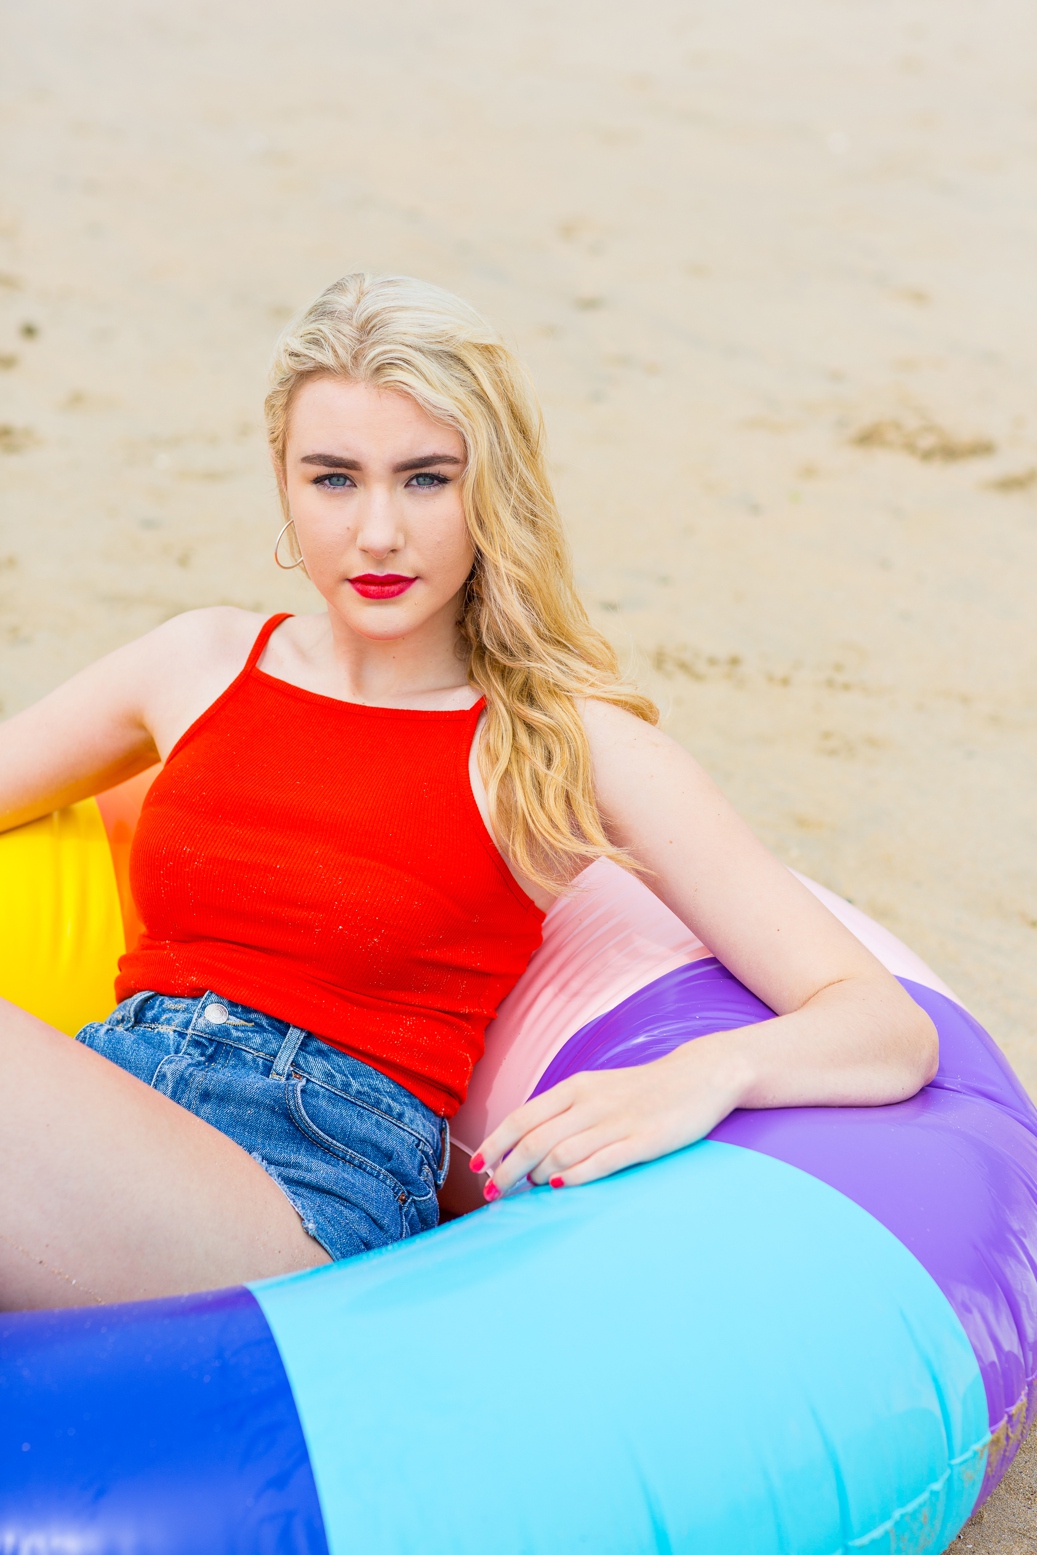 Colourful beach lifestyle photography. Cornwall photography & styling by Marianne Taylor.